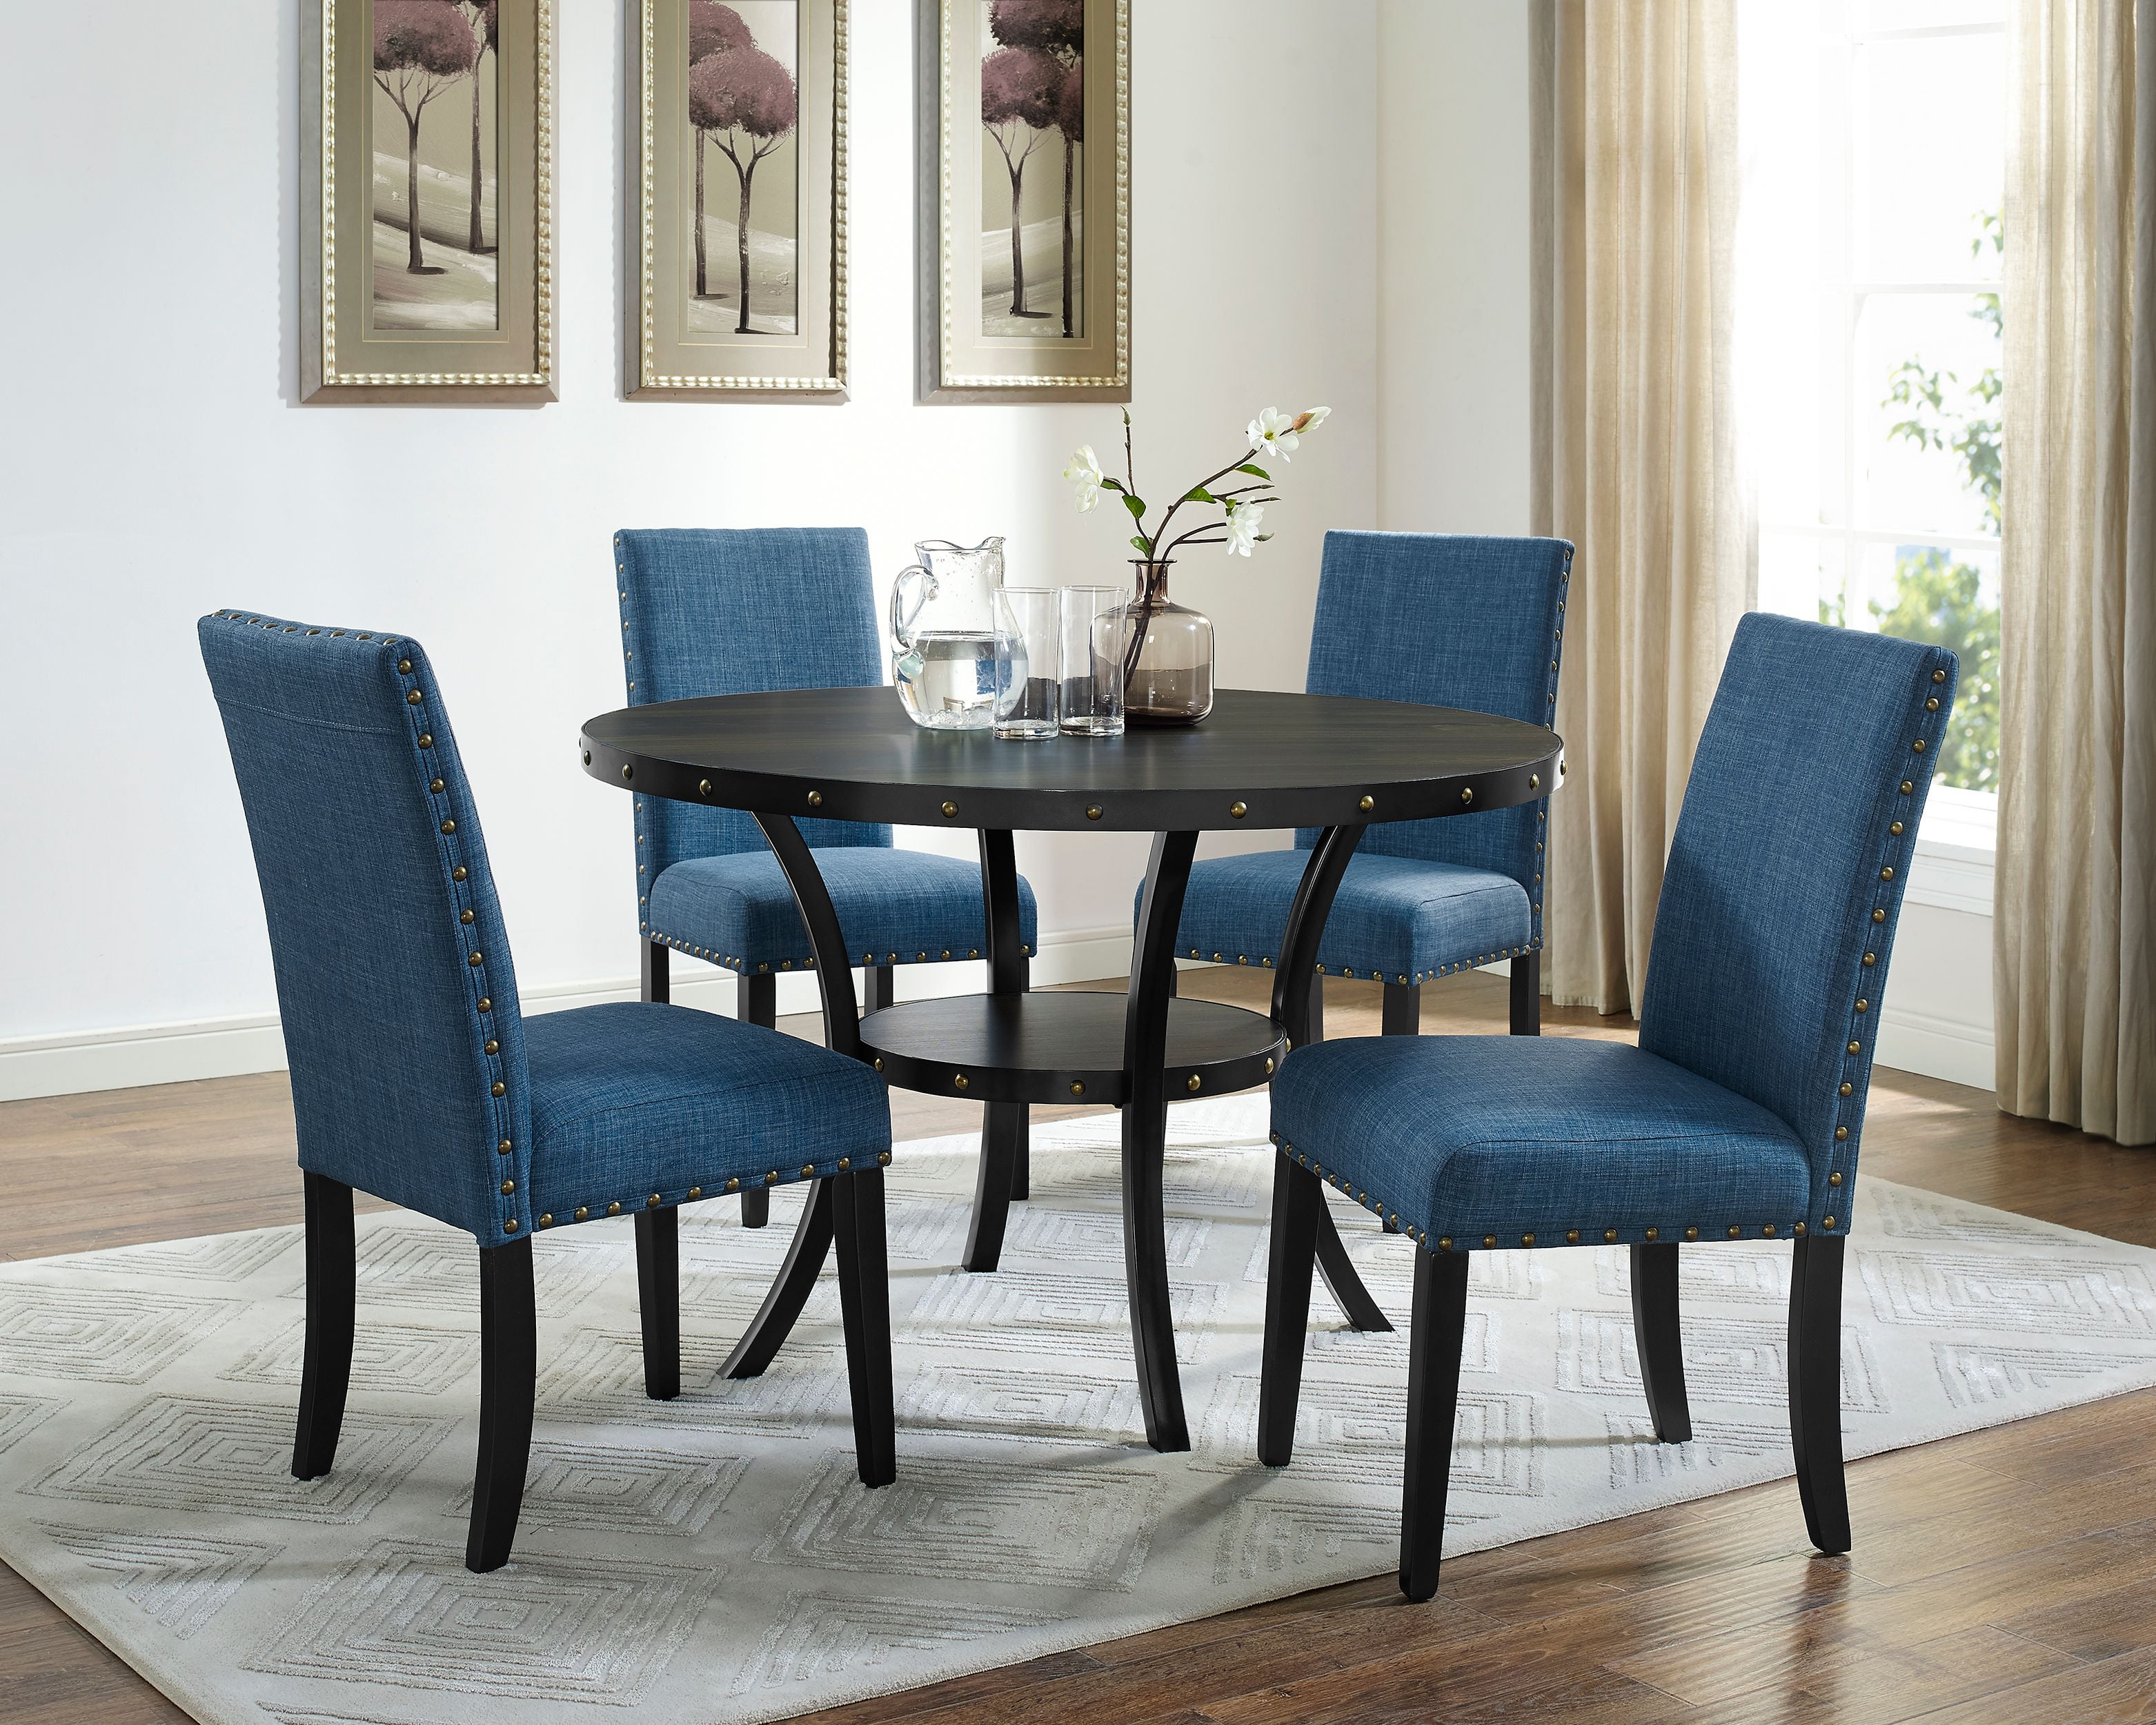 Set Of Blue Dining Room Chairs